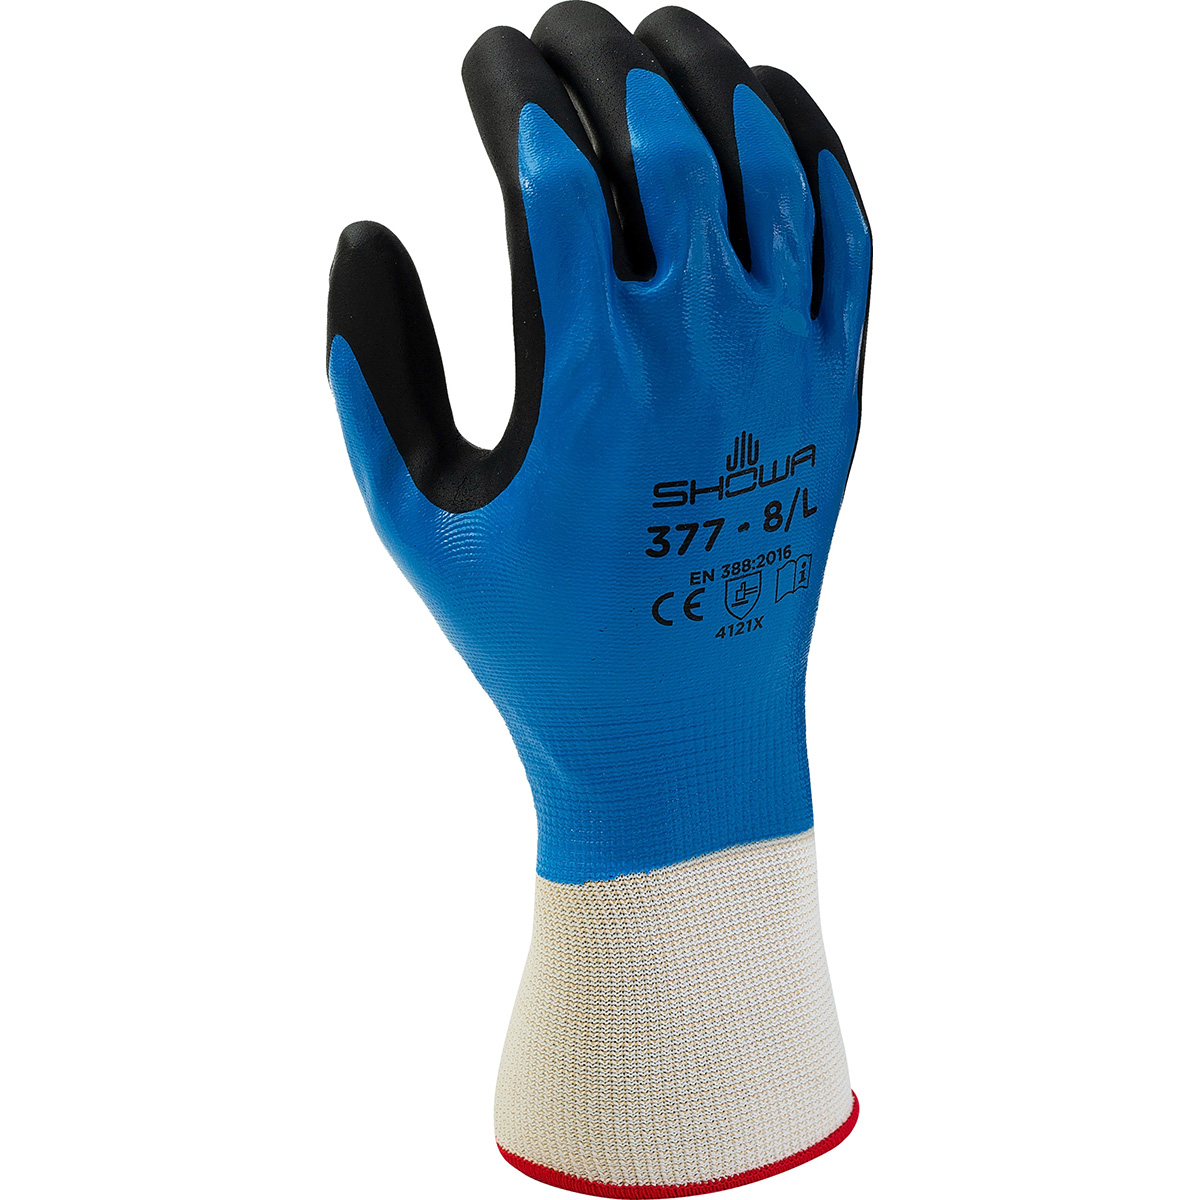 General purpose full nitrile blue undercoating w/black foamed palm coating, 13 gauge, seamless knitted liner, extra large